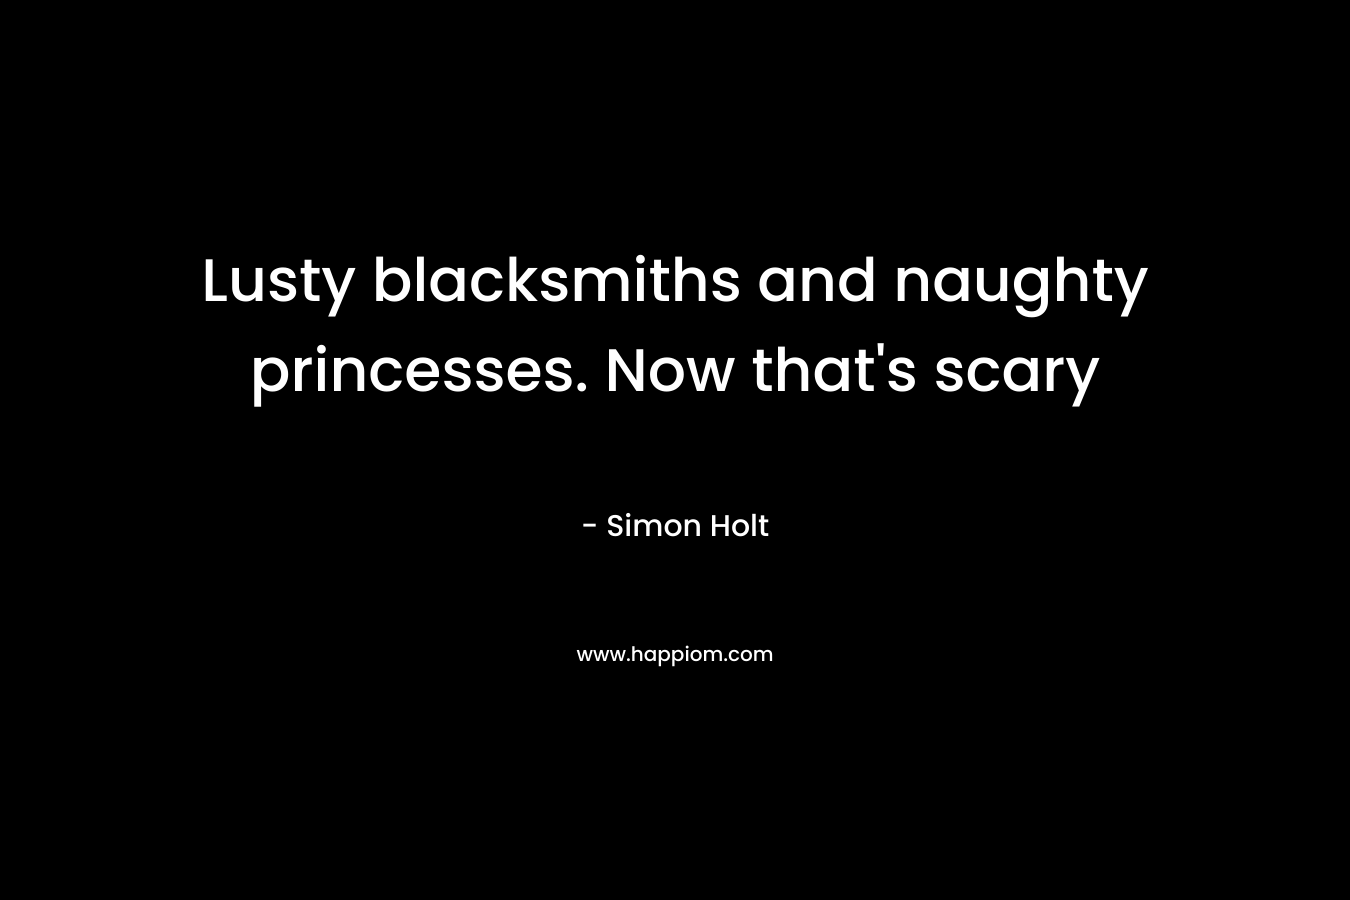 Lusty blacksmiths and naughty princesses. Now that's scary